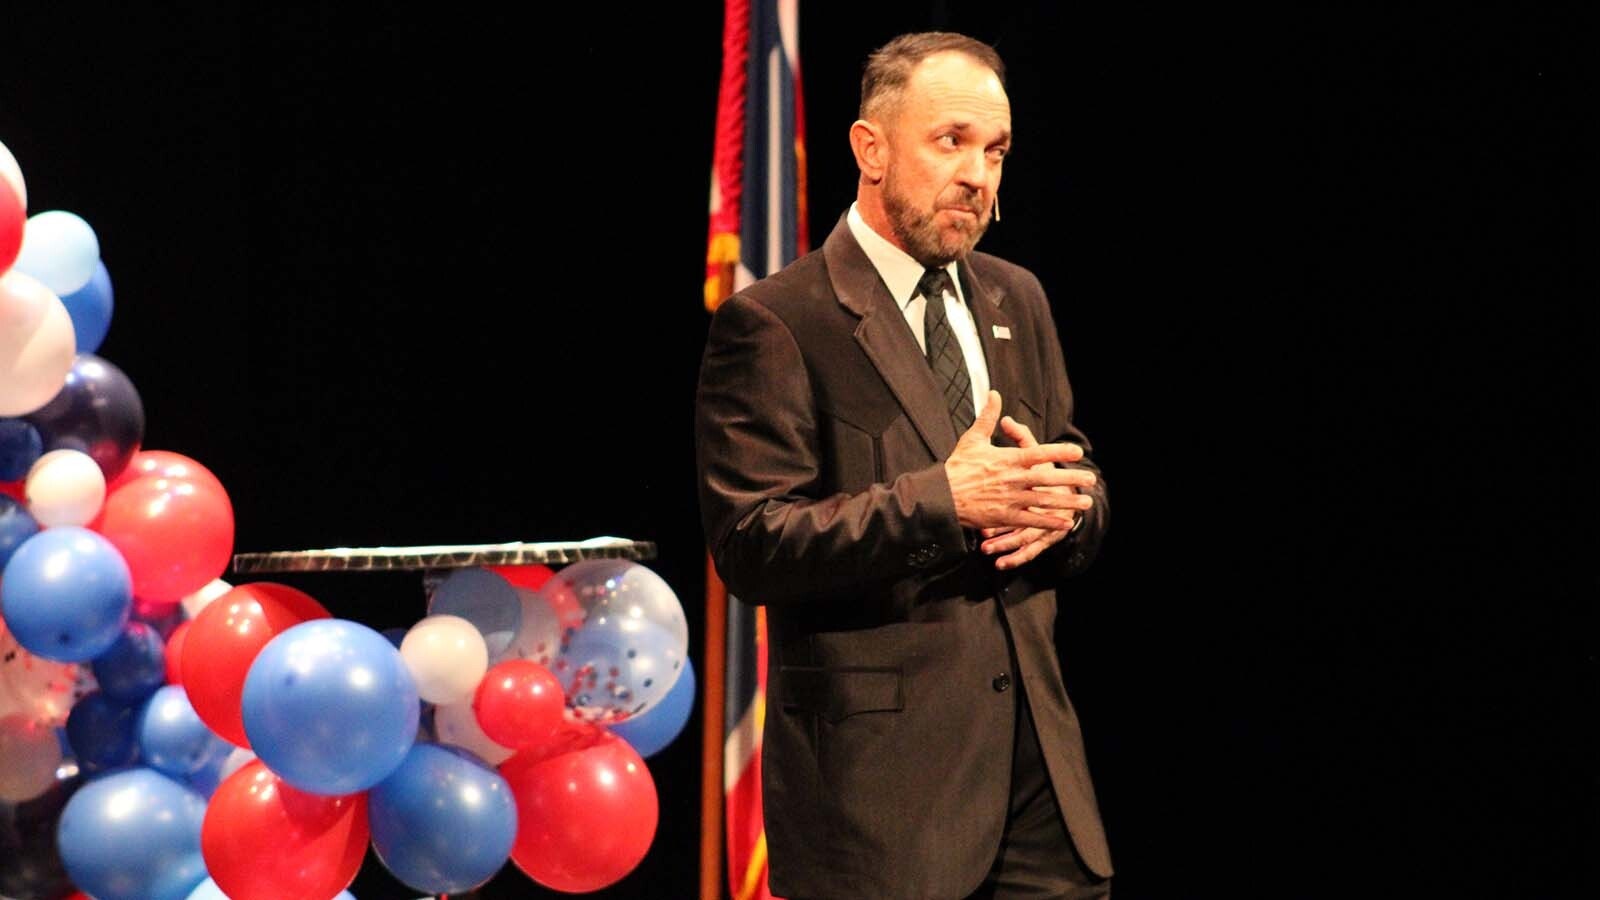 Couy Griffin, a former New Mexico county commissioner who was convicted of trespassing at the U.S. Capitol on Jan. 6, 2021, was in Gillette on Saturday, where he urged a receptive audience to fight election fraud at the local county level.